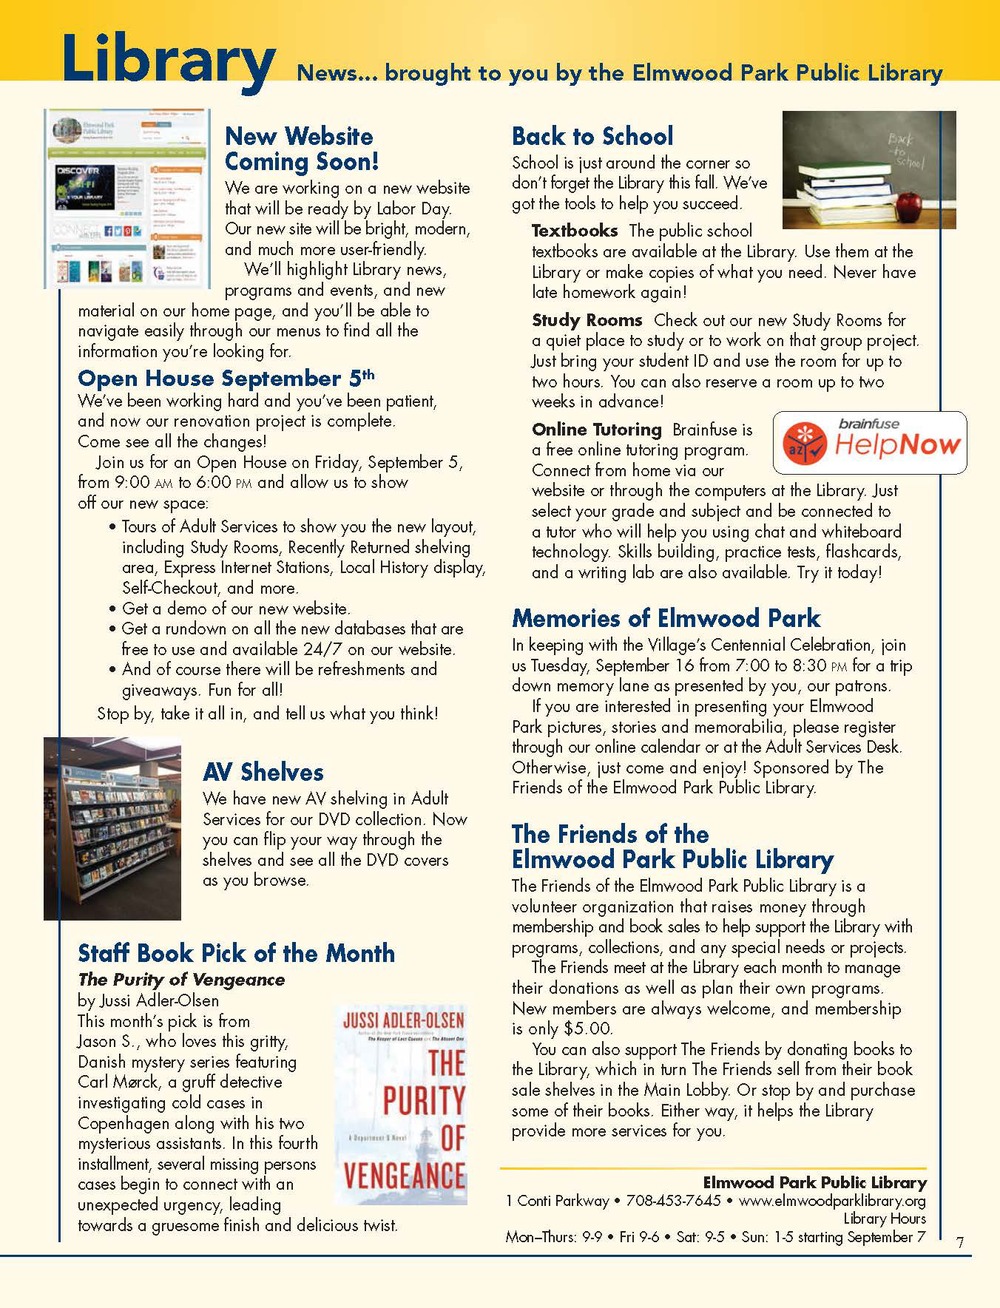 August 2014 EP Newsletter_Page_7.jpg